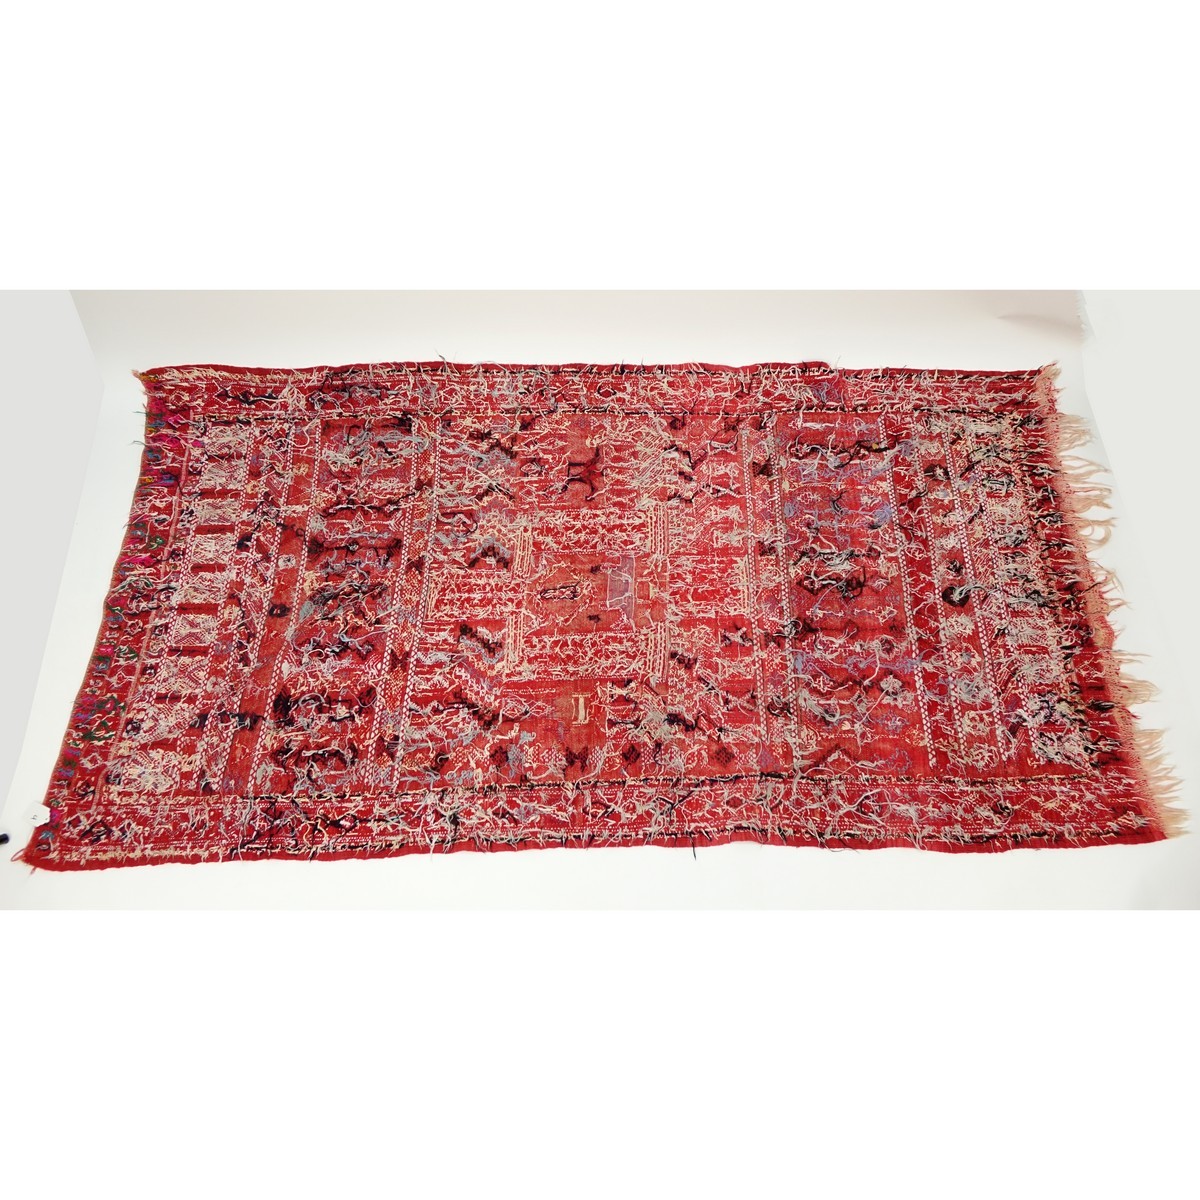 Semi Antique Moroccan Hand Knotted Tribal Rug. Wear to fringes, normal discoloration.